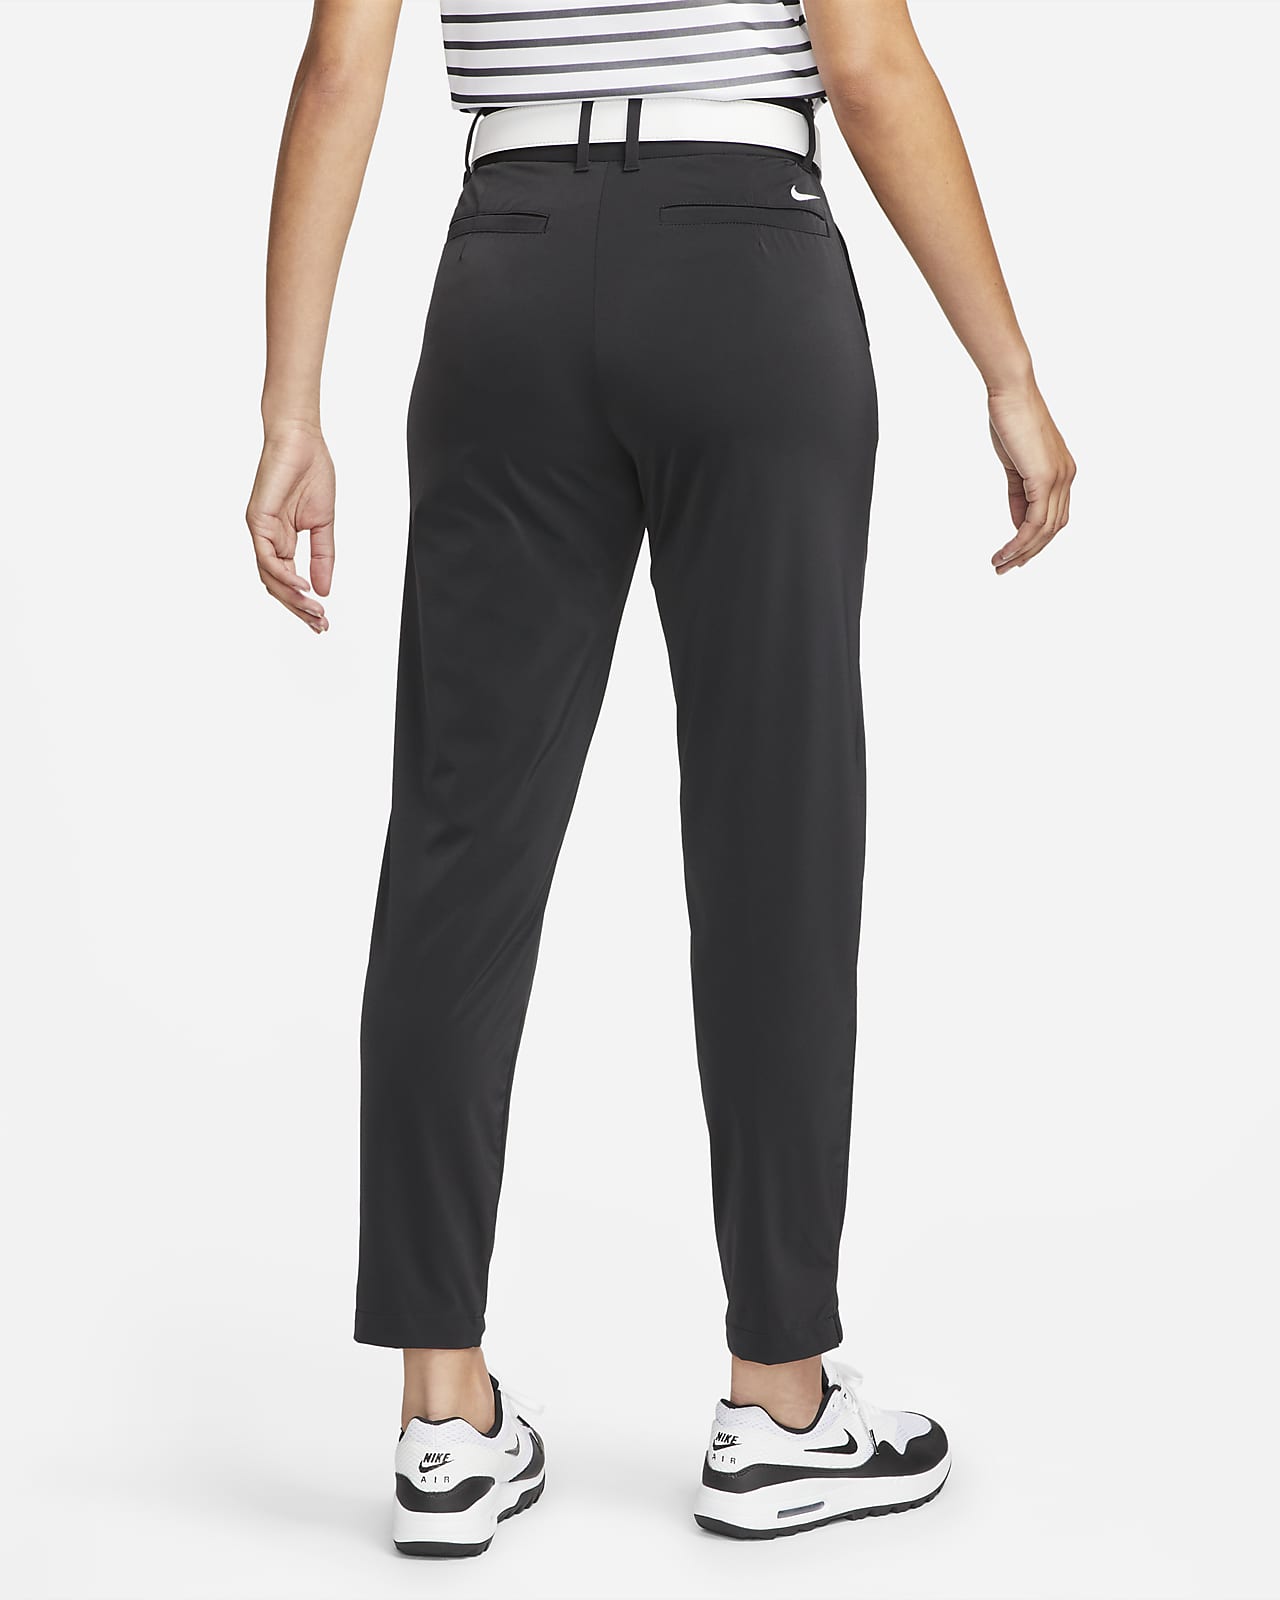 https://static.nike.com/a/images/t_PDP_1280_v1/f_auto,q_auto:eco/c8b265fe-cd21-4cb8-beba-d92f0ce74722/dri-fit-tour-golf-trousers-6Chzxq.png